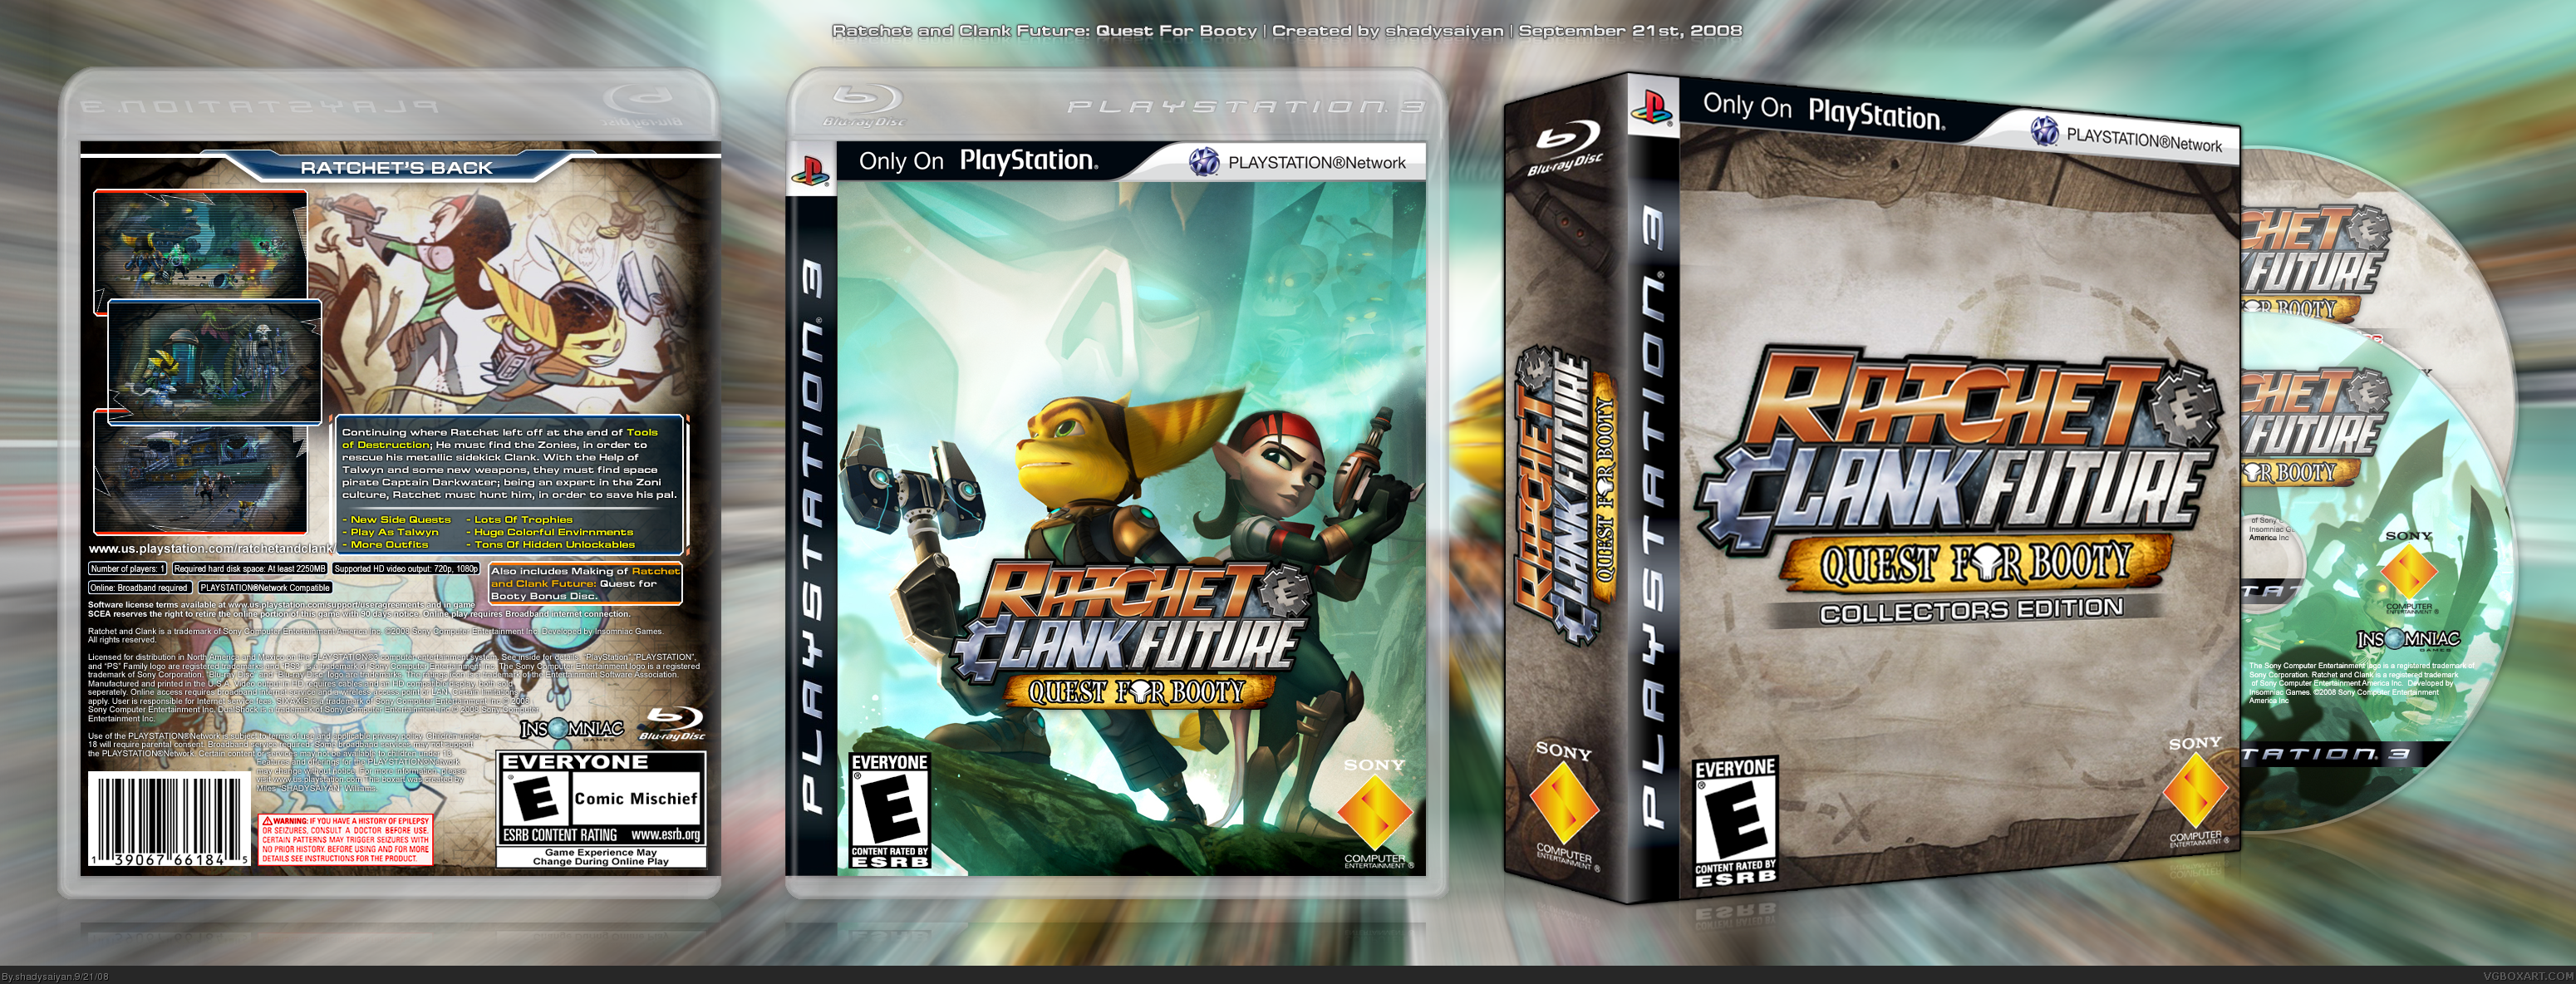 Ratchet and Clank Future: Quest for Booty box cover